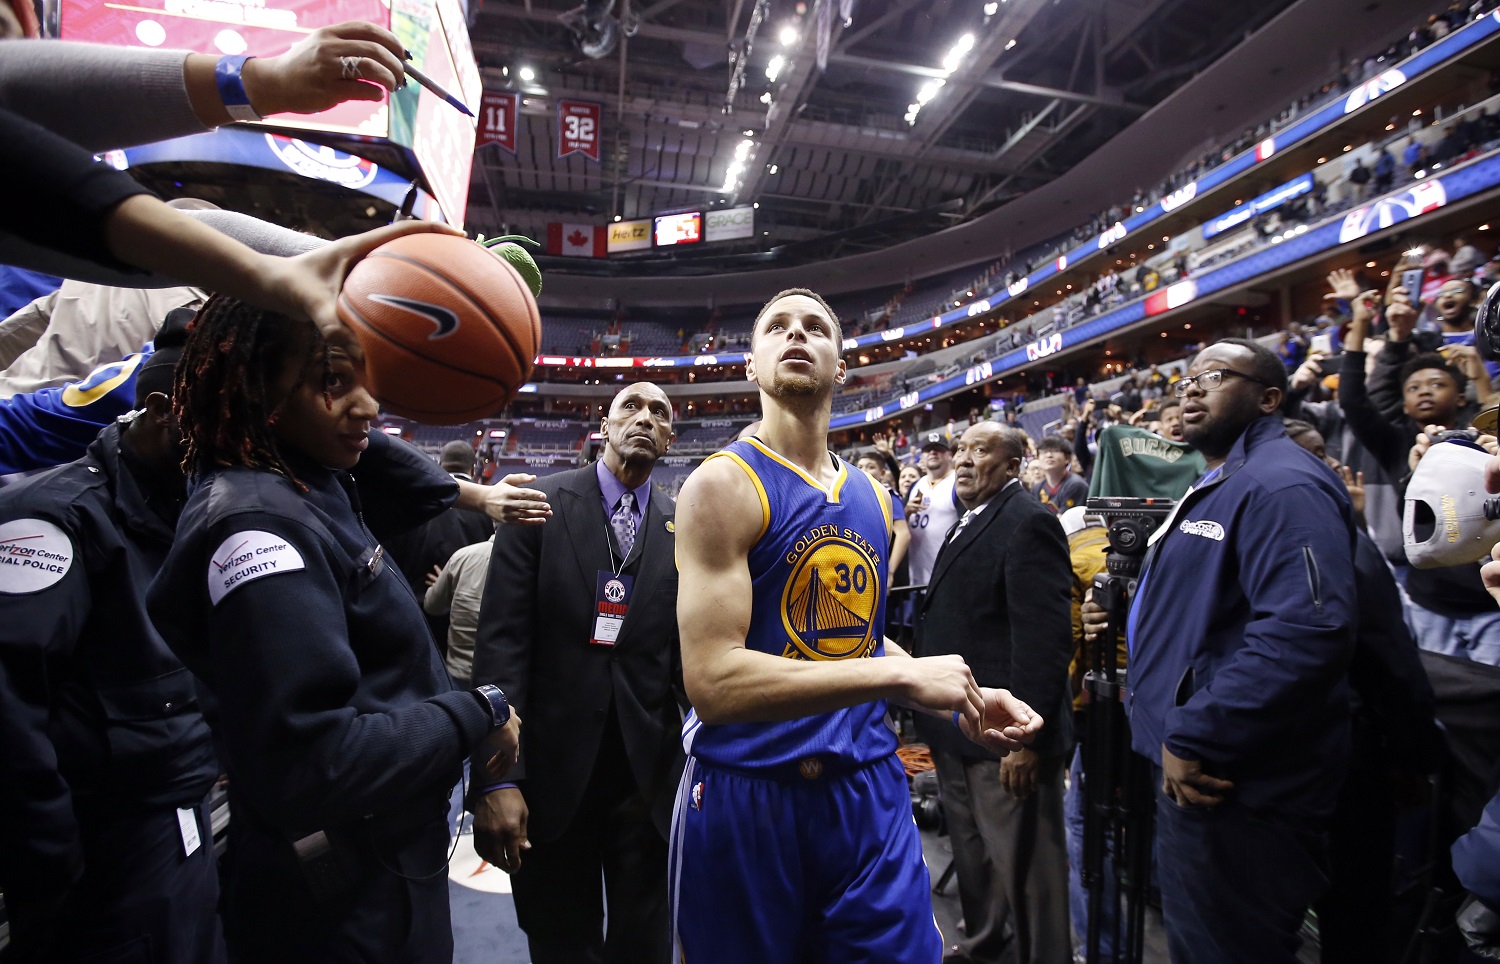 The Steph Curry Experience: The greatest show in sports